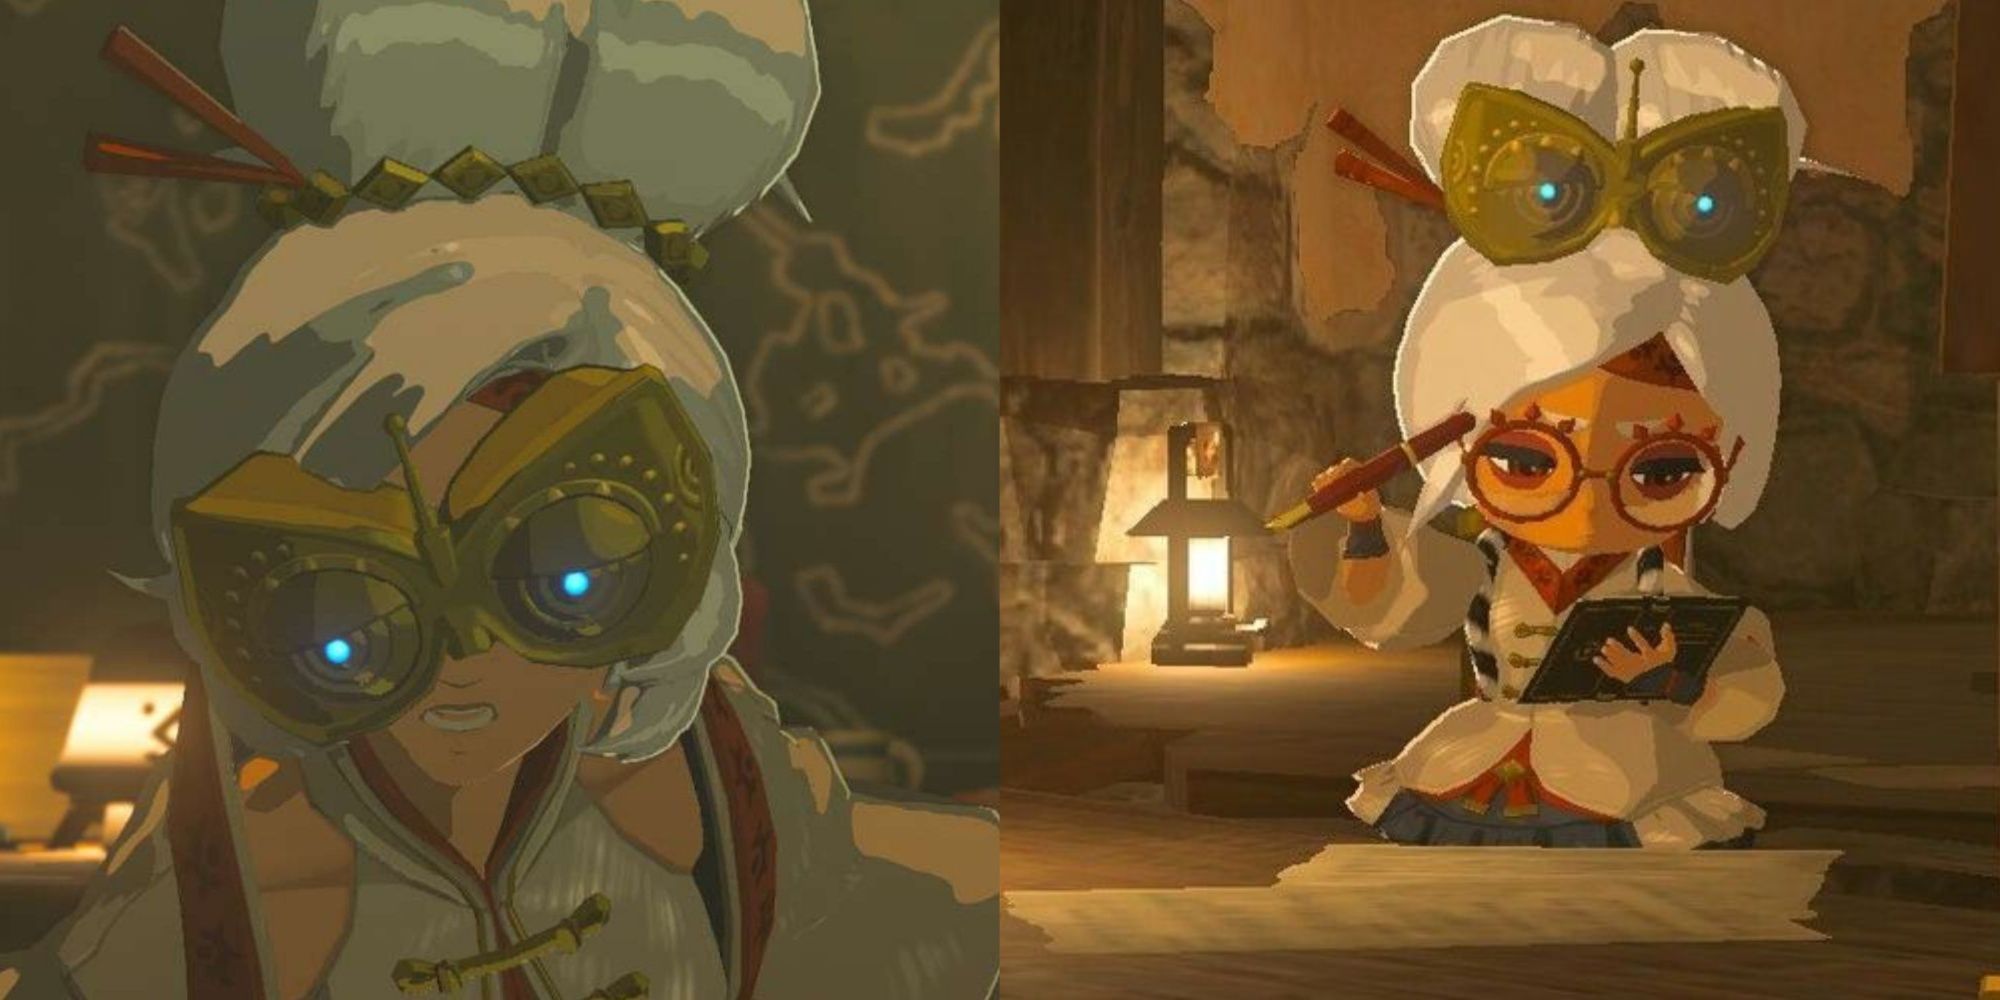 Purah as she appears in Tears of the Kingdom and in Breath of the Wild, left to right